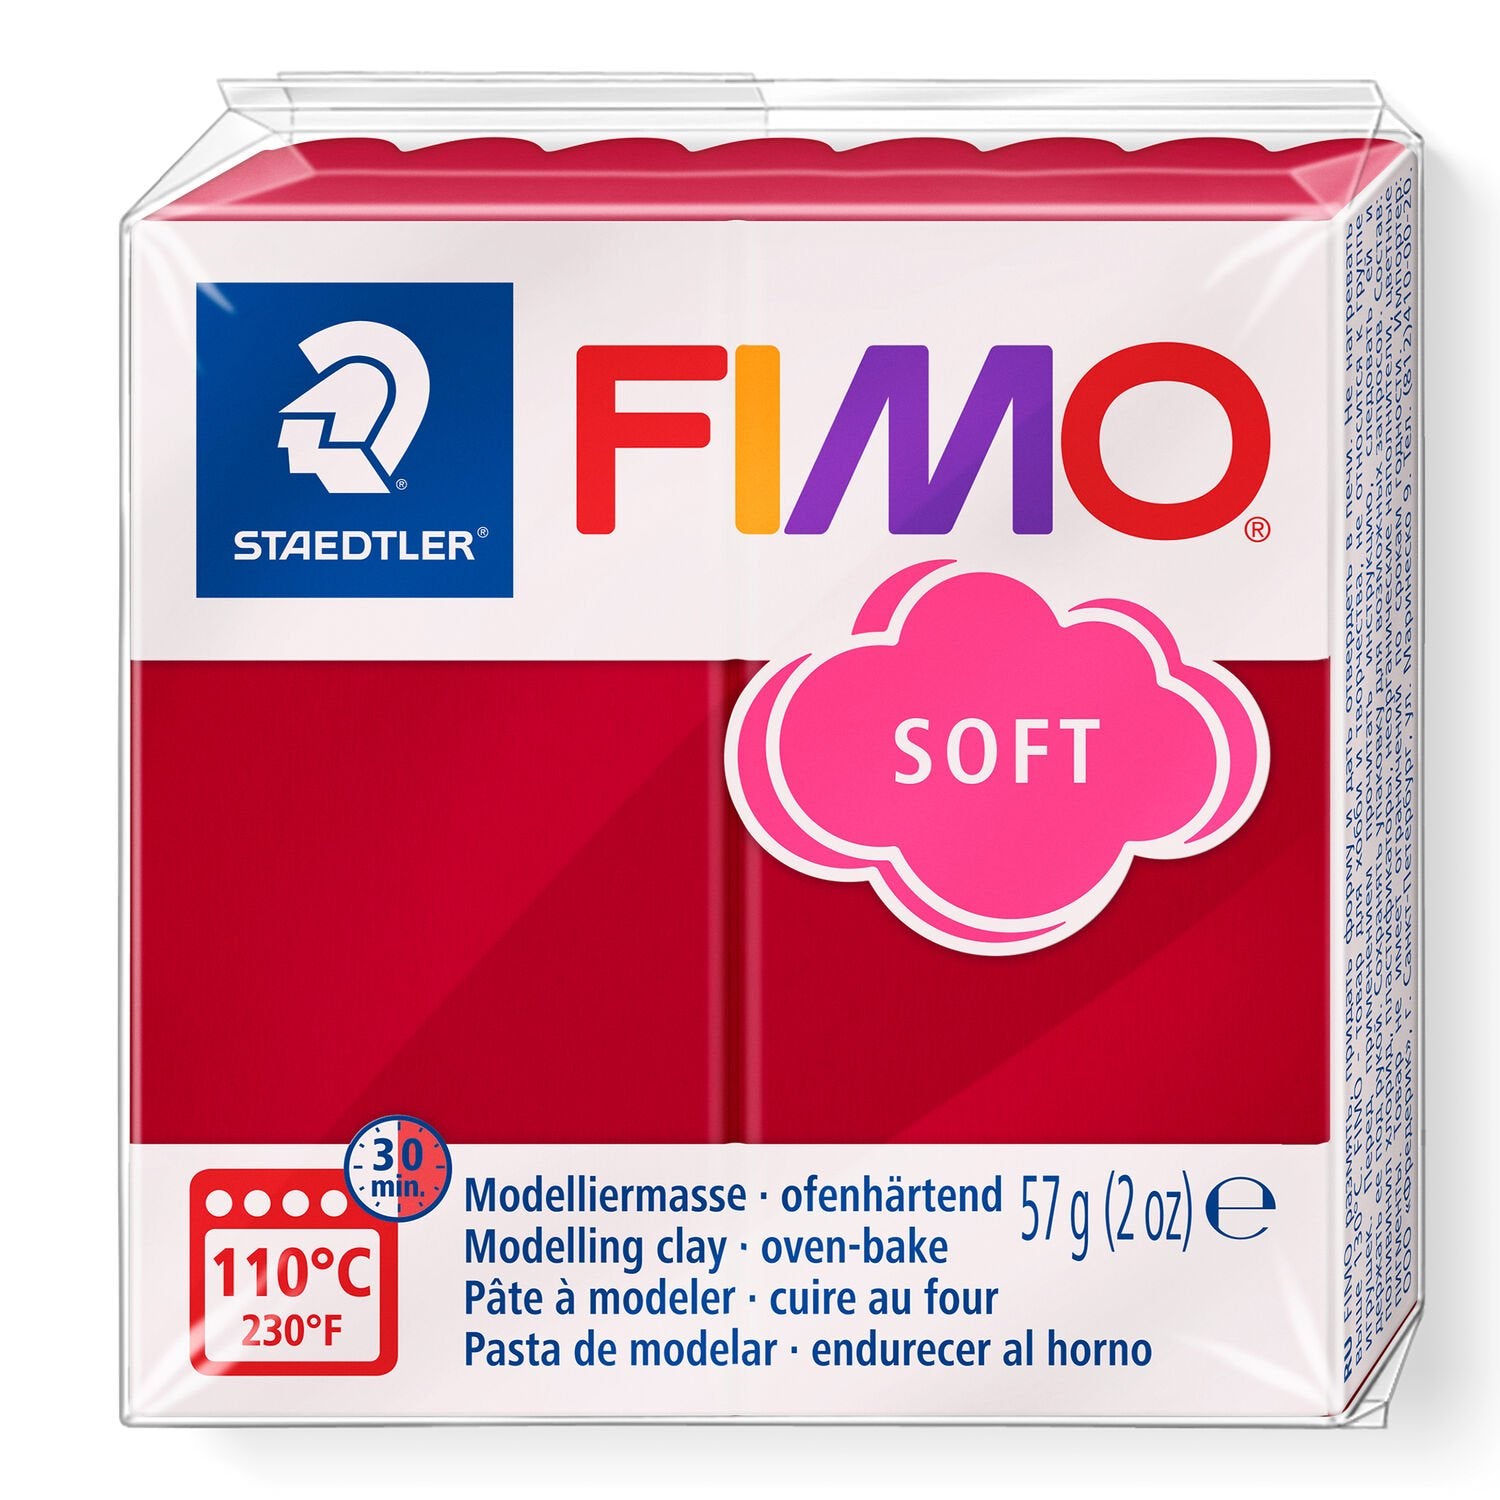 FIMO Soft Clay 57g 8020-26 Cherry Red  Simply cut, shape or blend then bake in a conventional oven at 110 degrees for 30 minutes.